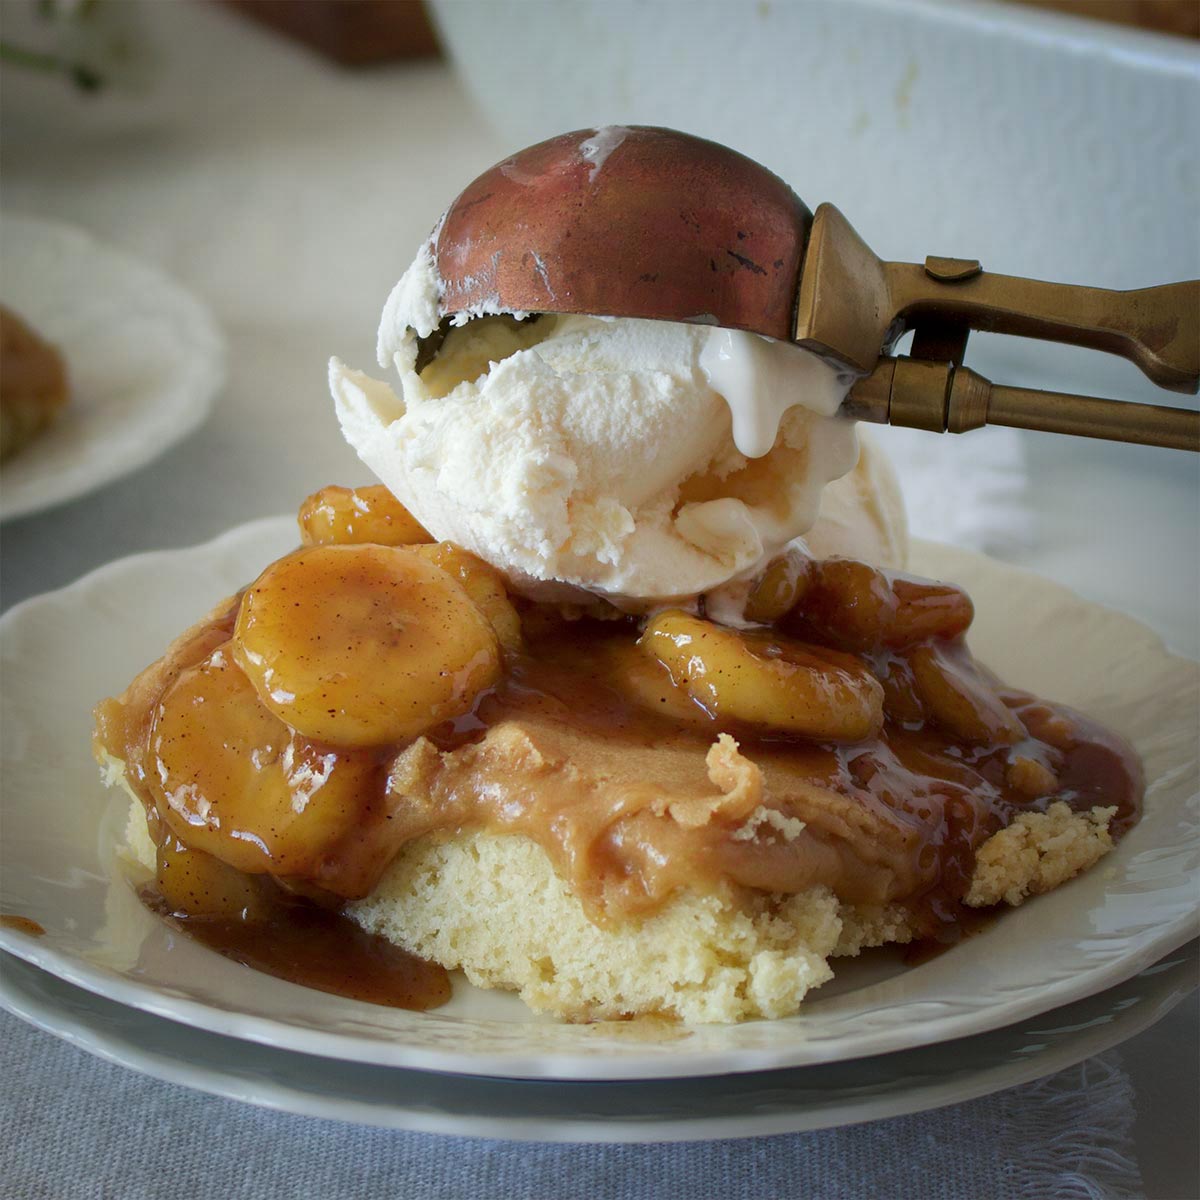 Someone using an old fashioned metal ice cream scoop to top a slice of bananas foster butter cake with vanilla ice cream.